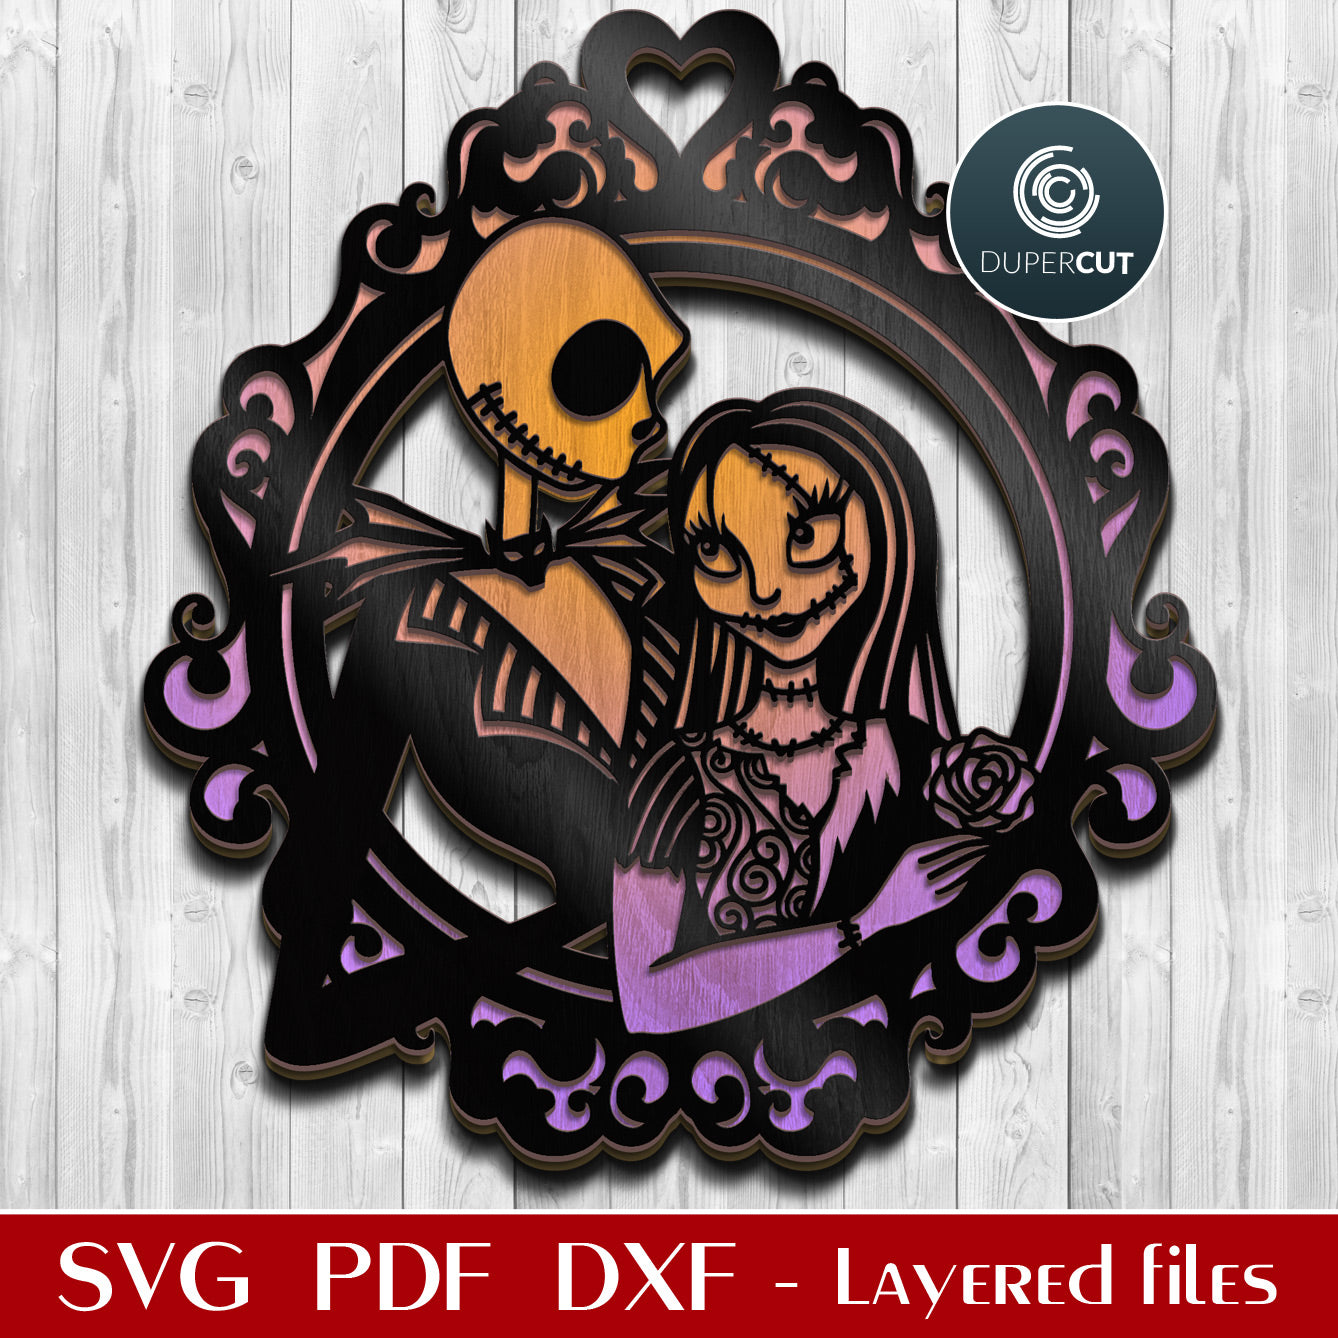 Jack and Sally door hanger layered cutting template - SVG DXF PNG vector files for laser and digital machines Glowforge, Cricut, Silhouette, CNC plasma by DuperCut